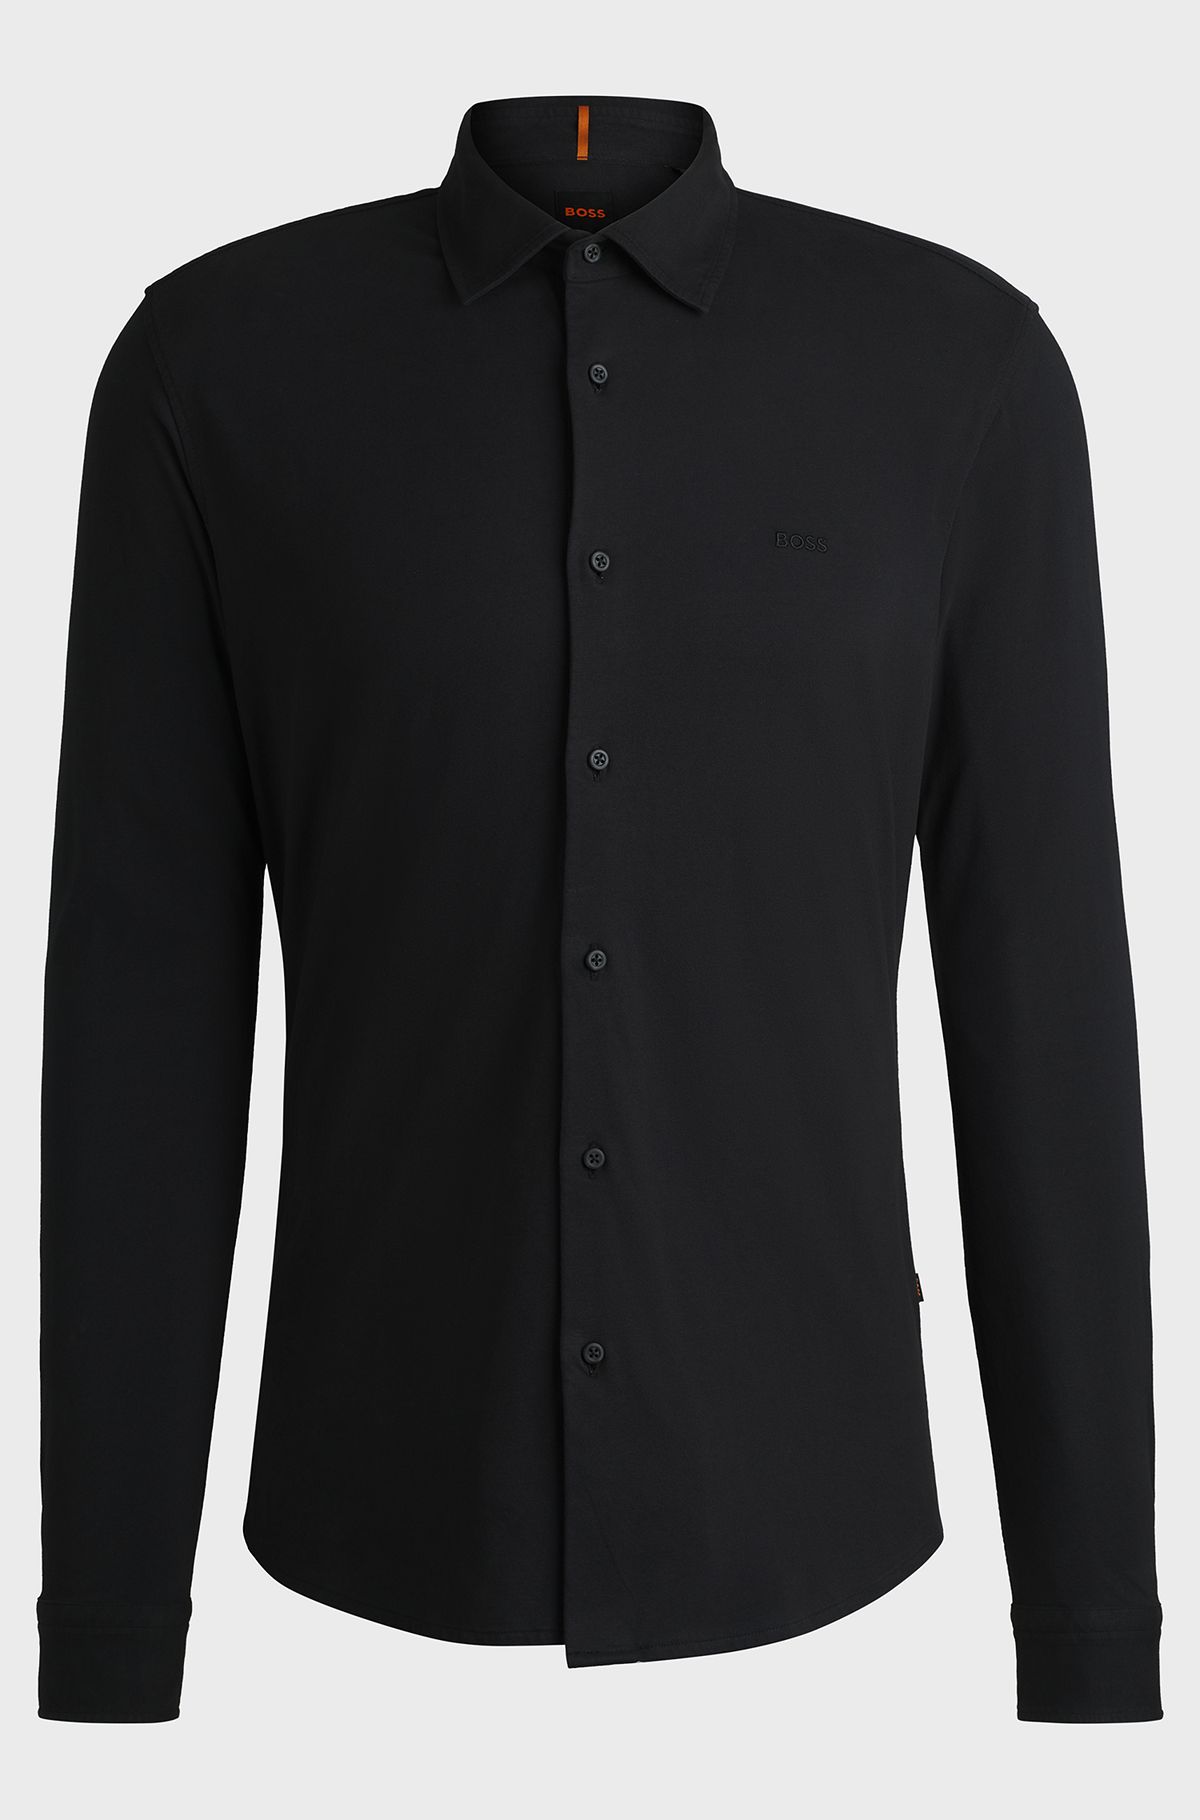 Slim-fit shirt in cotton jersey with embroidered branding, Black